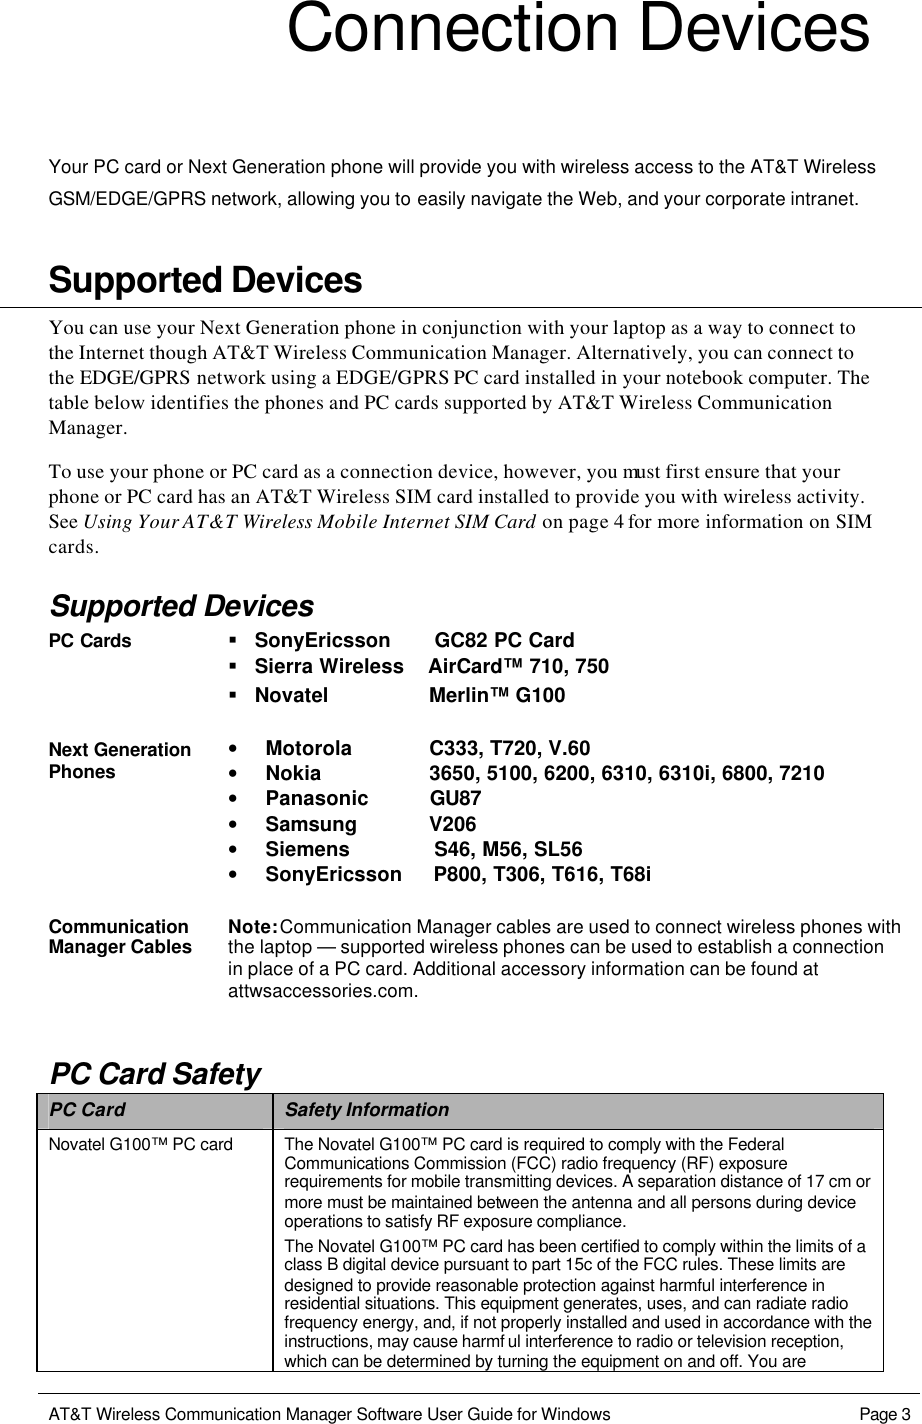   AT&amp;T Wireless Communication Manager Software User Guide for Windows    Page 3  Connection Devices  Your PC card or Next Generation phone will provide you with wireless access to the AT&amp;T Wireless GSM/EDGE/GPRS network, allowing you to easily navigate the Web, and your corporate intranet.    Supported Devices You can use your Next Generation phone in conjunction with your laptop as a way to connect to the Internet though AT&amp;T Wireless Communication Manager. Alternatively, you can connect to the EDGE/GPRS network using a EDGE/GPRS PC card installed in your notebook computer. The table below identifies the phones and PC cards supported by AT&amp;T Wireless Communication Manager.  To use your phone or PC card as a connection device, however, you must first ensure that your phone or PC card has an AT&amp;T Wireless SIM card installed to provide you with wireless activity. See Using Your AT&amp;T Wireless Mobile Internet SIM Card on page 4 for more information on SIM cards. Supported Devices PC Cards § SonyEricsson       GC82 PC Card  § Sierra Wireless    AirCard™ 710, 750  § Novatel                 Merlin™ G100  Next Generation Phones • Motorola             C333, T720, V.60 • Nokia                  3650, 5100, 6200, 6310, 6310i, 6800, 7210 • Panasonic          GU87 • Samsung            V206 • Siemens              S46, M56, SL56 • SonyEricsson     P800, T306, T616, T68i  Communication Manager Cables Note: Communication Manager cables are used to connect wireless phones with the laptop — supported wireless phones can be used to establish a connection in place of a PC card. Additional accessory information can be found at attwsaccessories.com. PC Card Safety PC Card Safety Information Novatel G100™ PC card The Novatel G100™ PC card is required to comply with the Federal Communications Commission (FCC) radio frequency (RF) exposure requirements for mobile transmitting devices. A separation distance of 17 cm or more must be maintained between the antenna and all persons during device operations to satisfy RF exposure compliance. The Novatel G100™ PC card has been certified to comply within the limits of a class B digital device pursuant to part 15c of the FCC rules. These limits are designed to provide reasonable protection against harmful interference in residential situations. This equipment generates, uses, and can radiate radio frequency energy, and, if not properly installed and used in accordance with the instructions, may cause harmf ul interference to radio or television reception, which can be determined by turning the equipment on and off. You are 